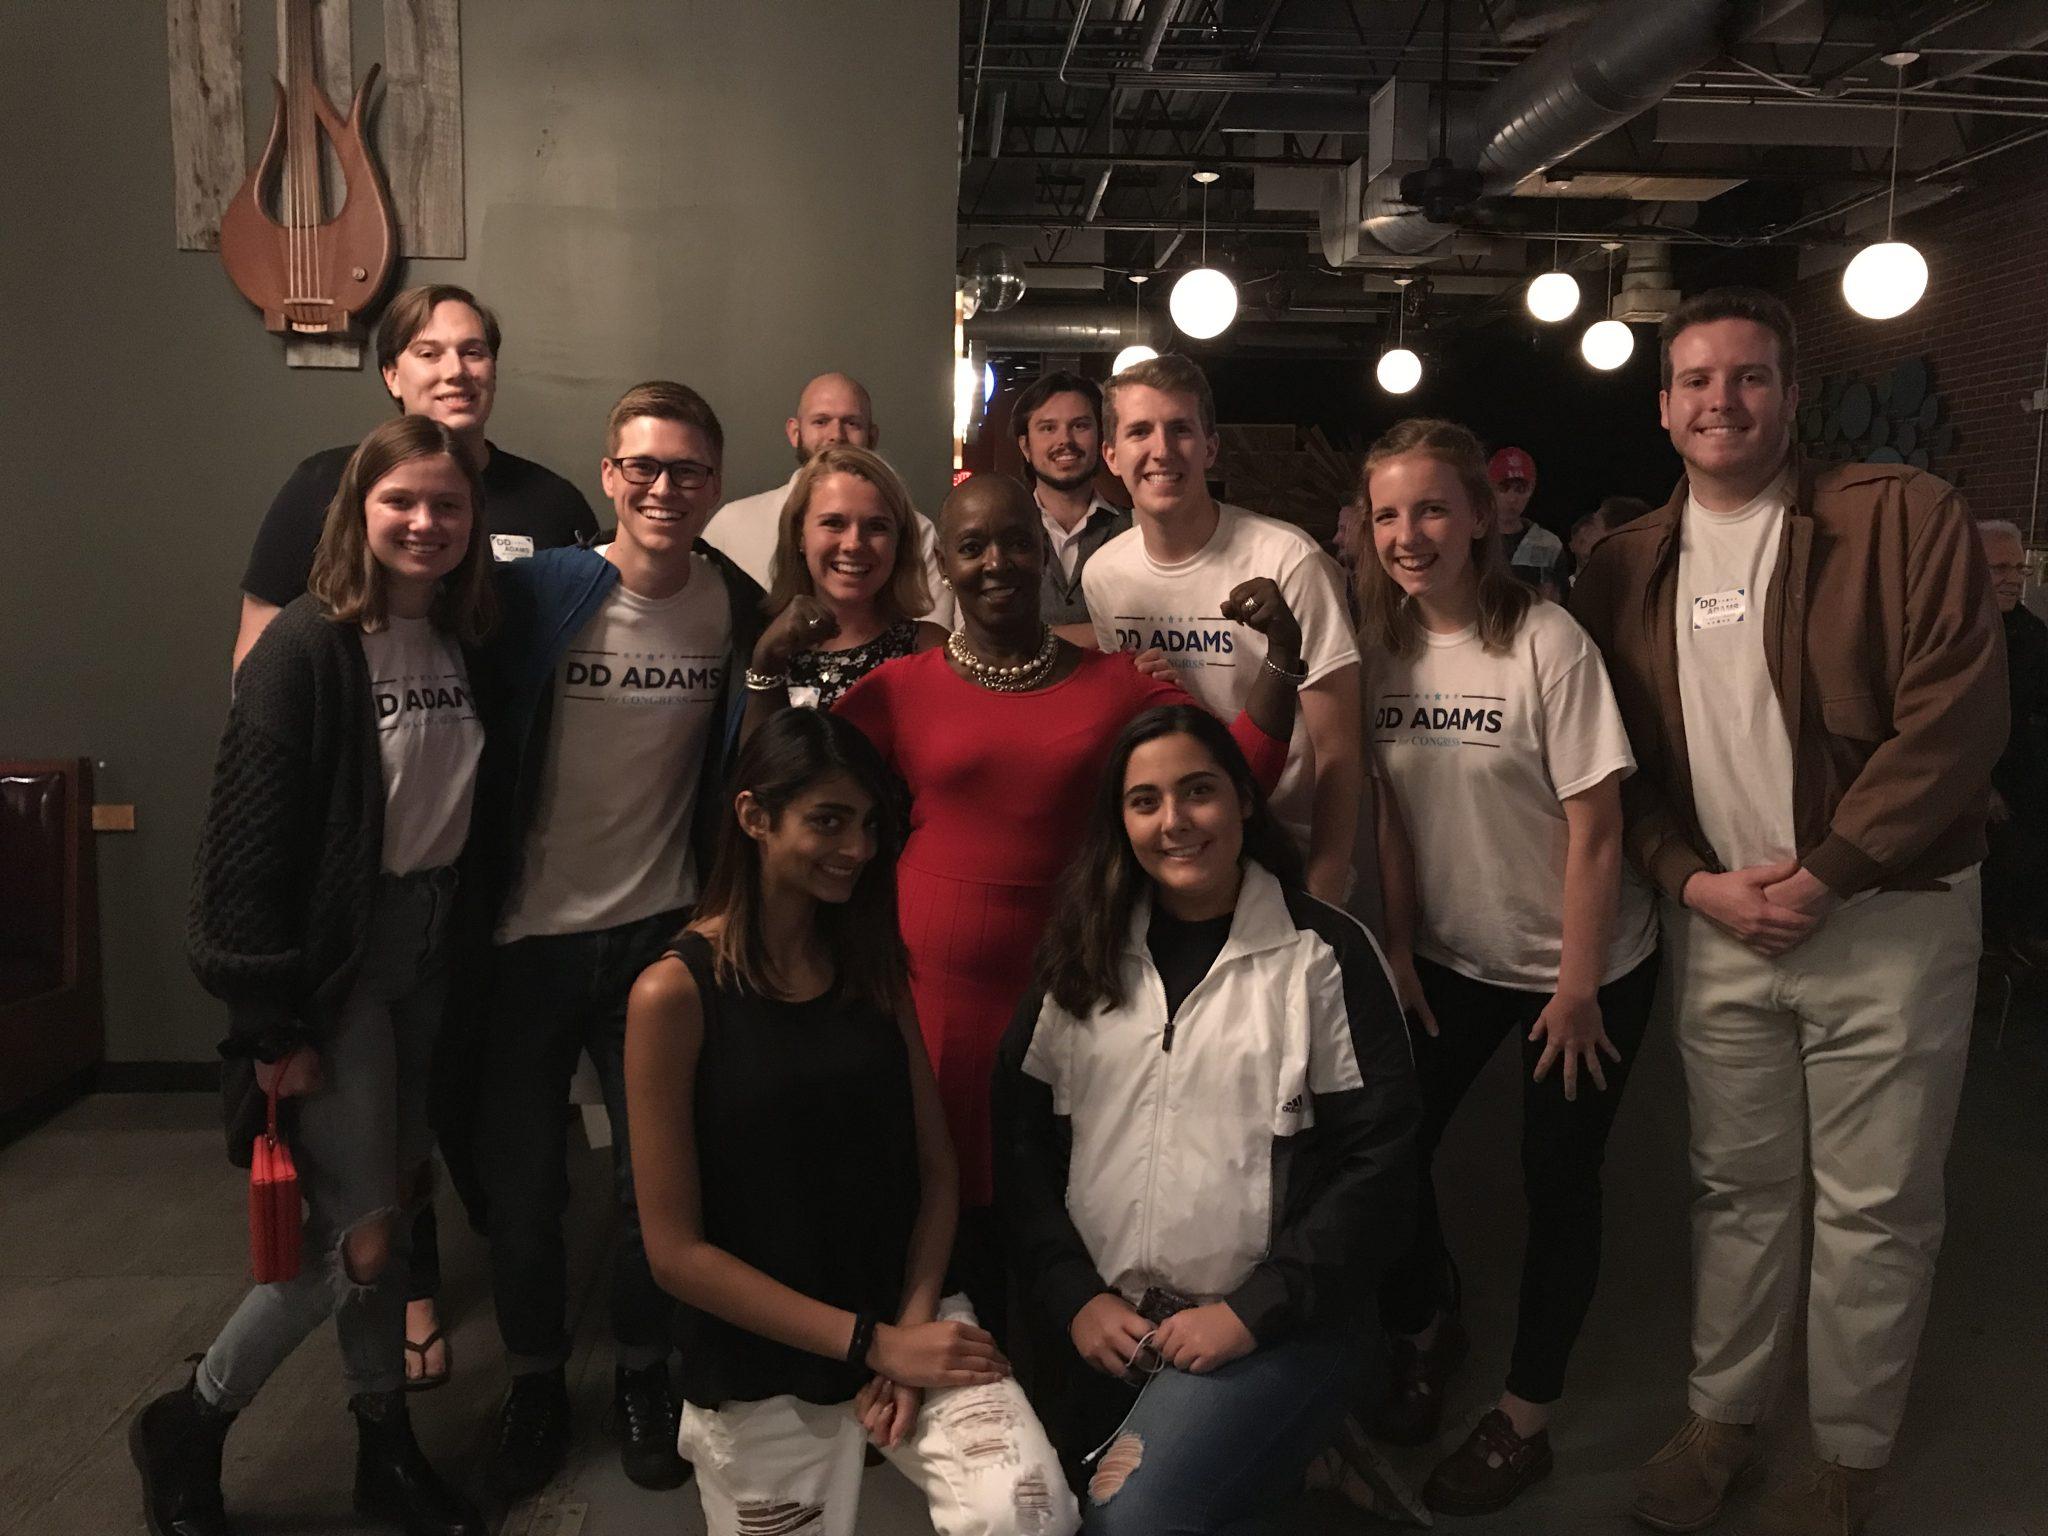 DD+Adams+poses+with+students+from+App+State%2C+some+serving+as+interns+for+her+campaign.+Adams+has+been+running+for+congress+for+22+months.